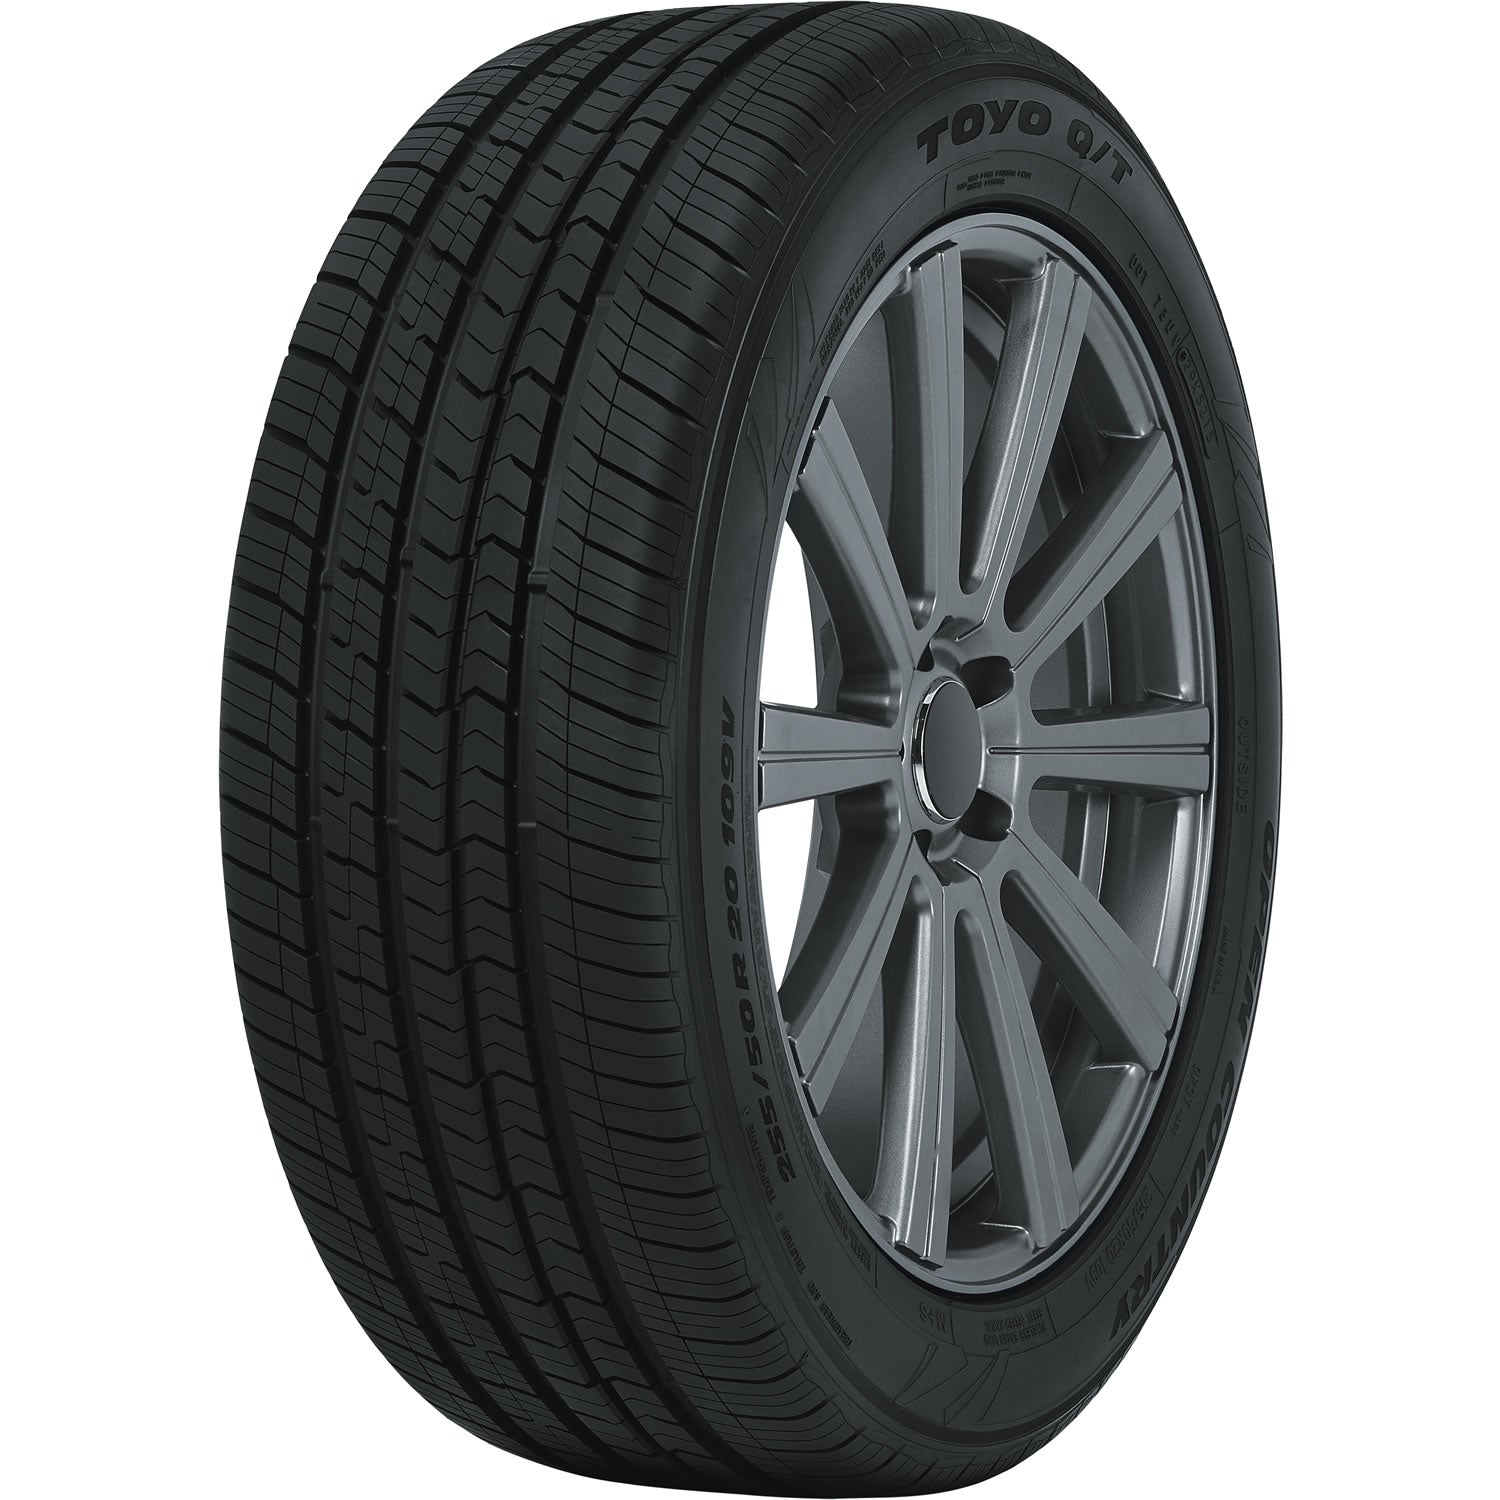 TOYO TIRES OPEN COUNTRY Q/T 225/65R17 (28.5X9R 17) Tires